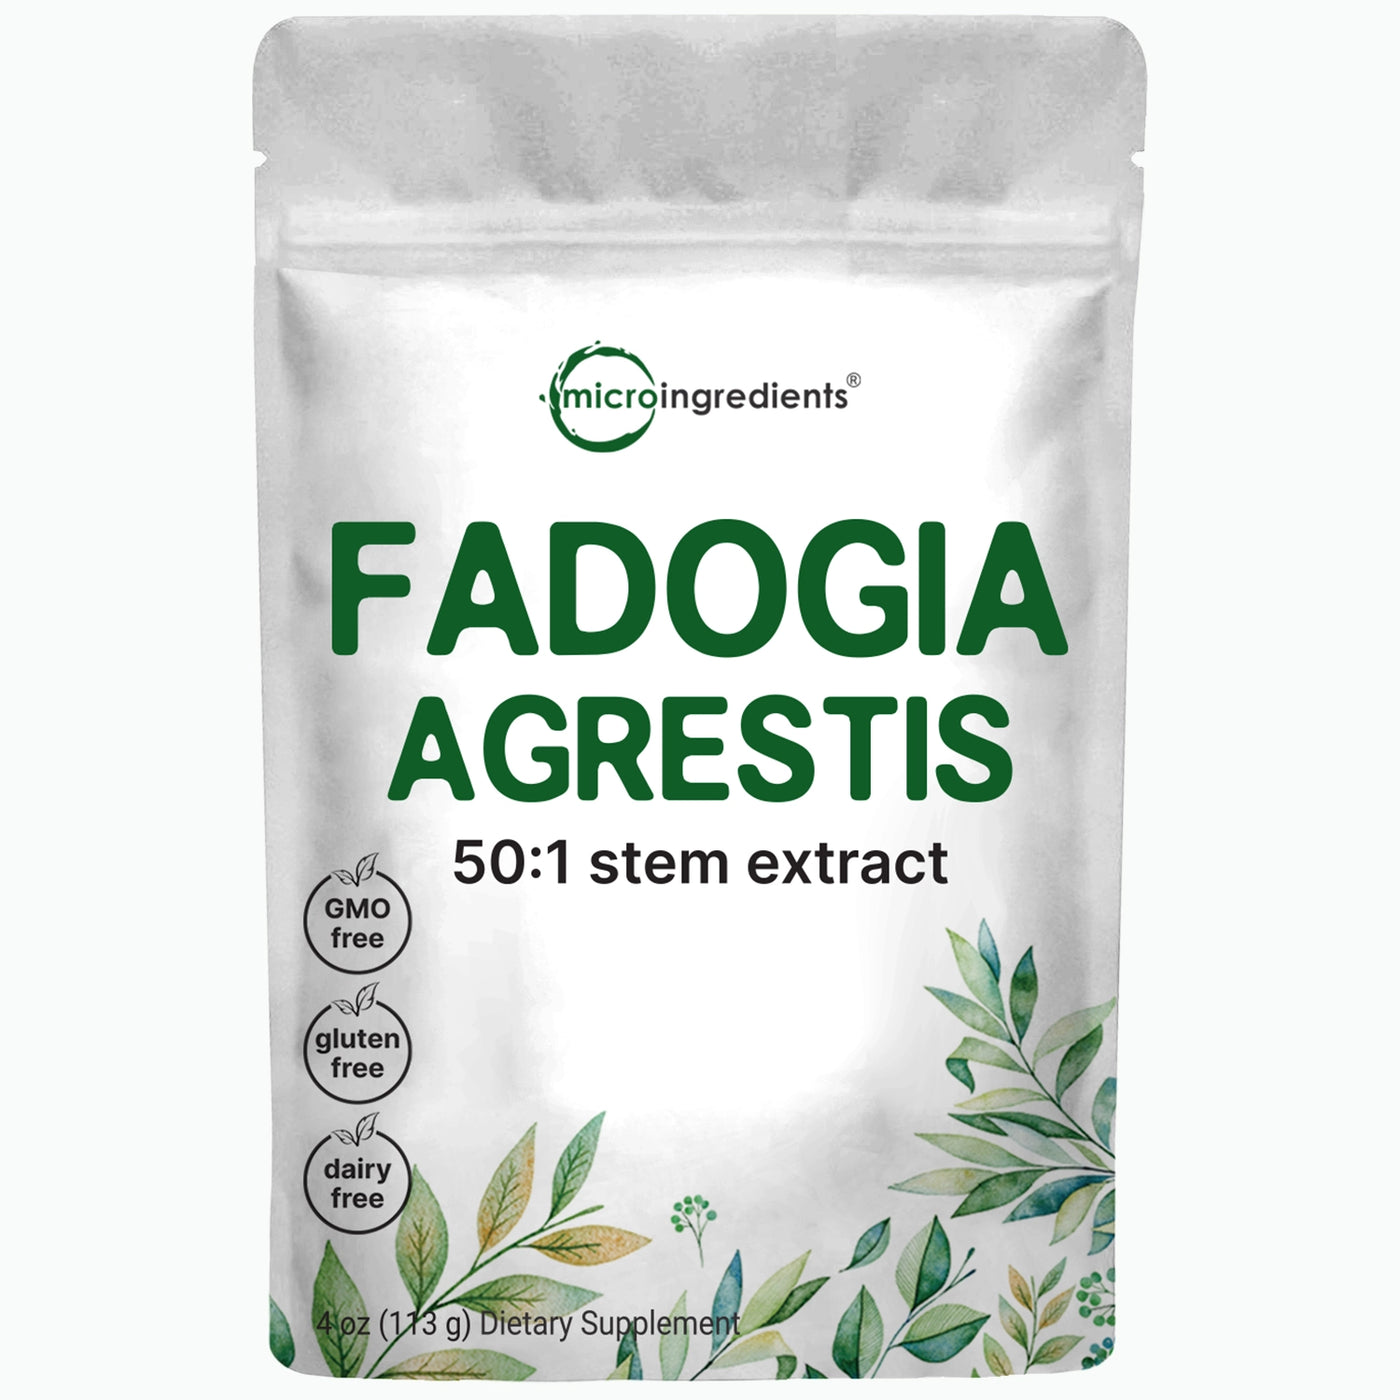 Fadogia Agrestis 501 Stem Extract front